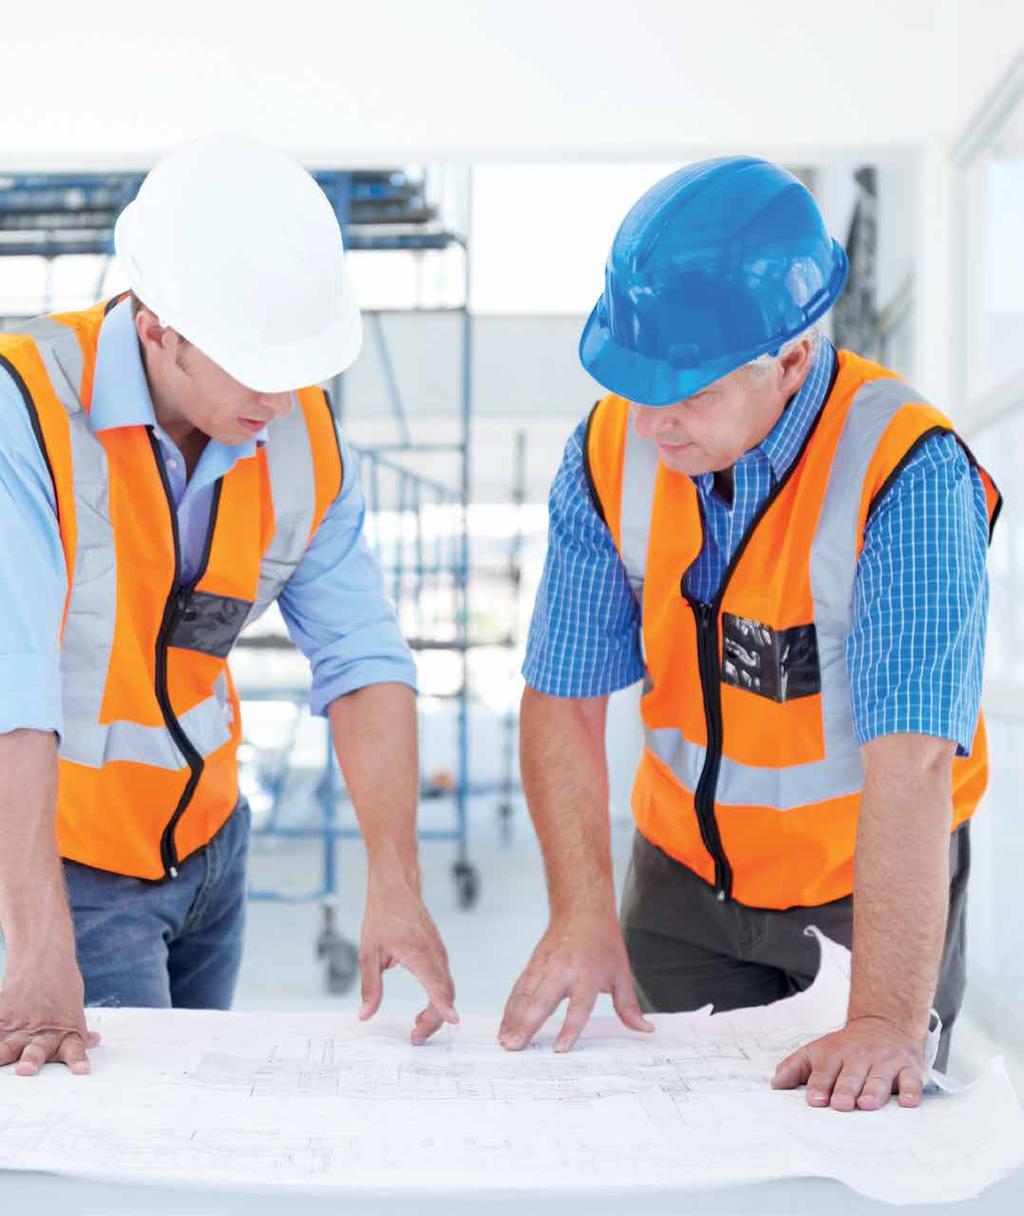 Building Relationships The Importance of Collaboration The number of stakeholders involved on any given construction project is often a long list, including the architects and engineers, owners and